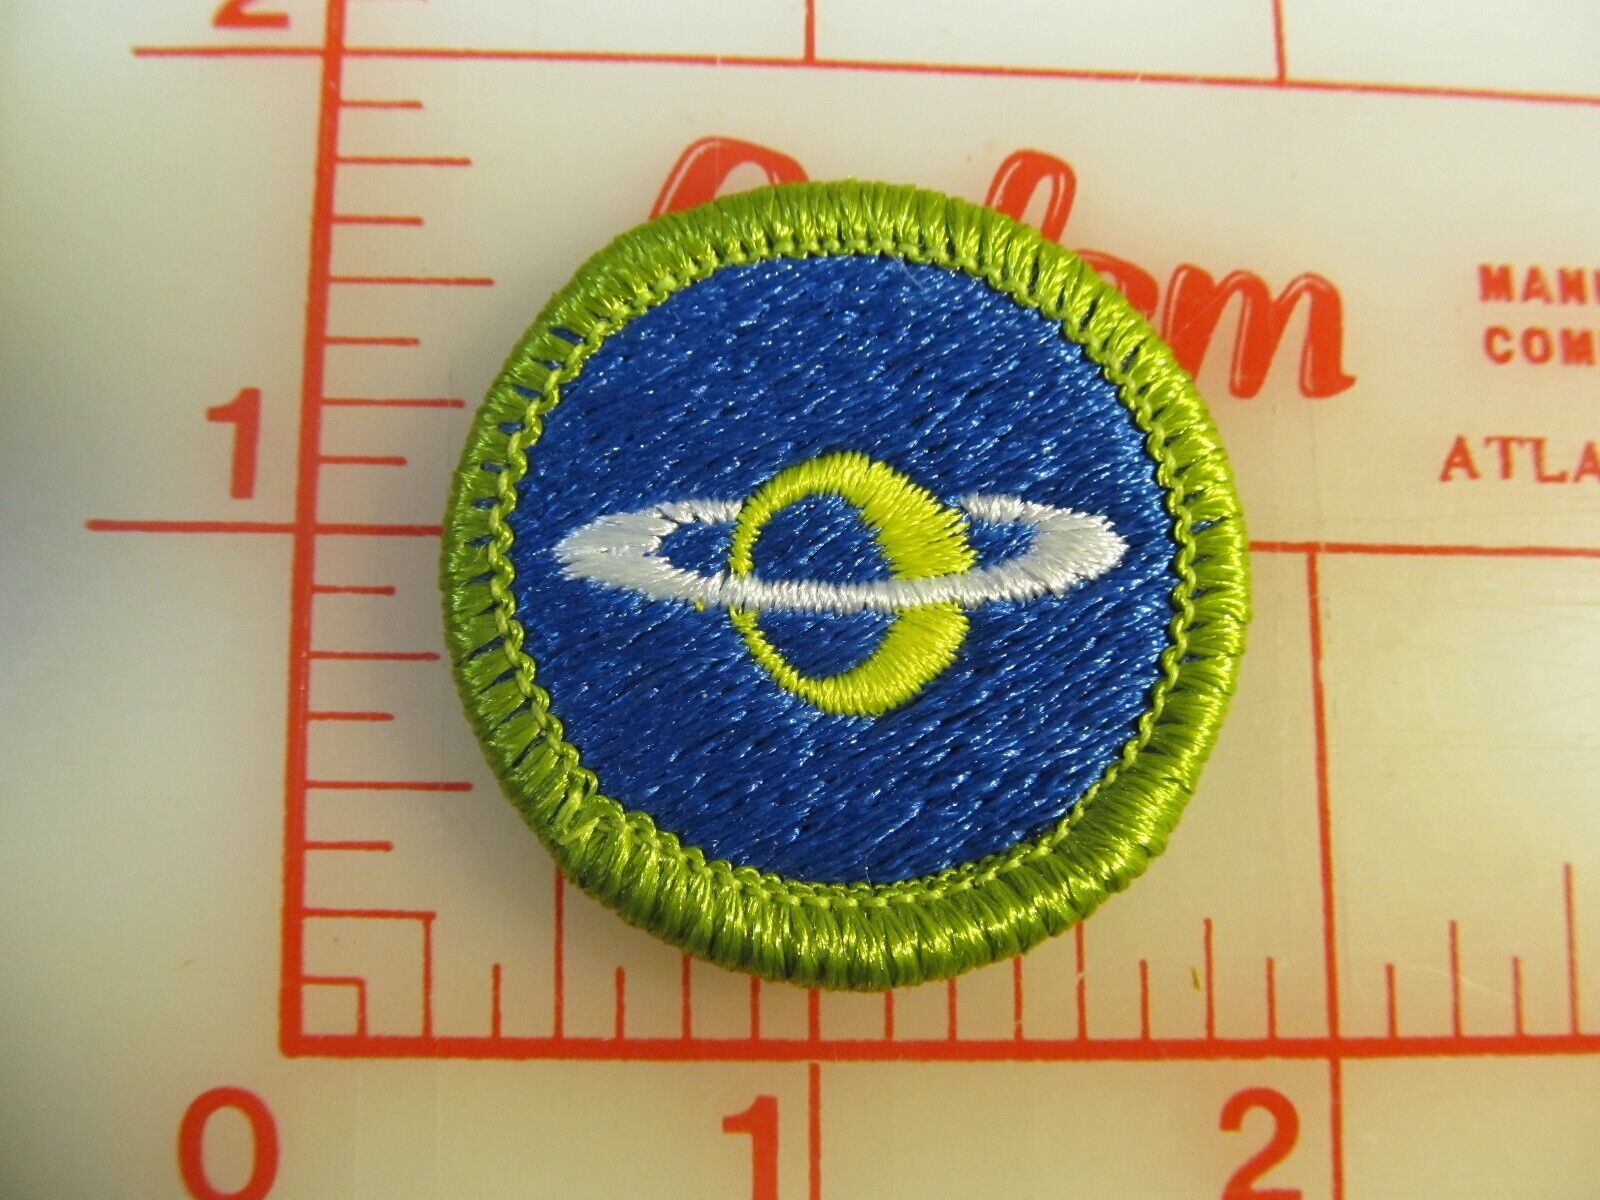 Astronomy merit badge plastic backed patch (oP)